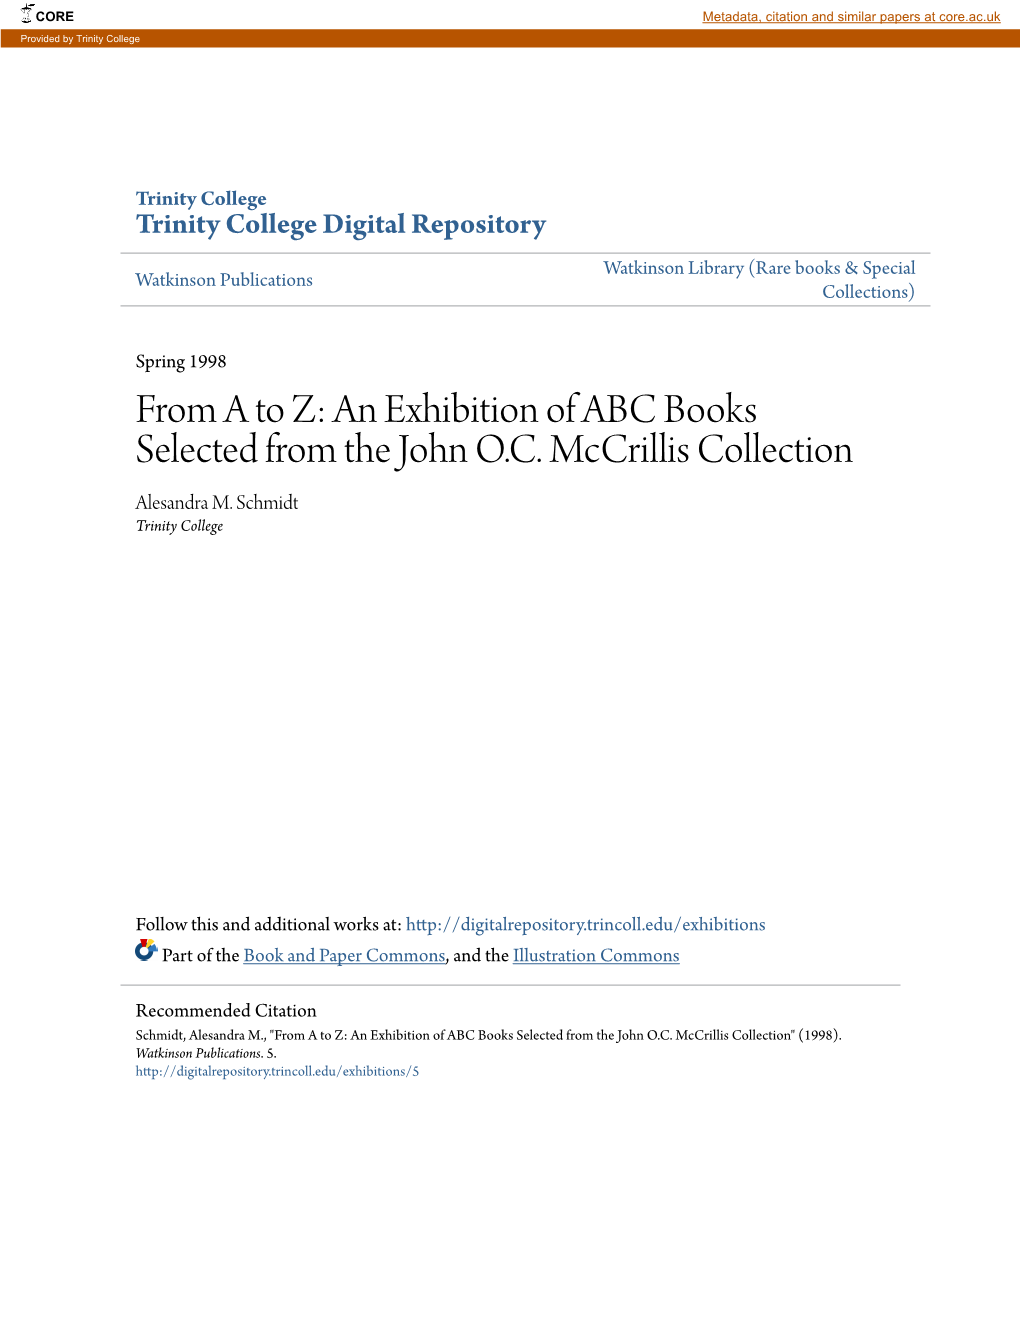 An Exhibition of ABC Books Selected from the John OC Mccrillis Collection